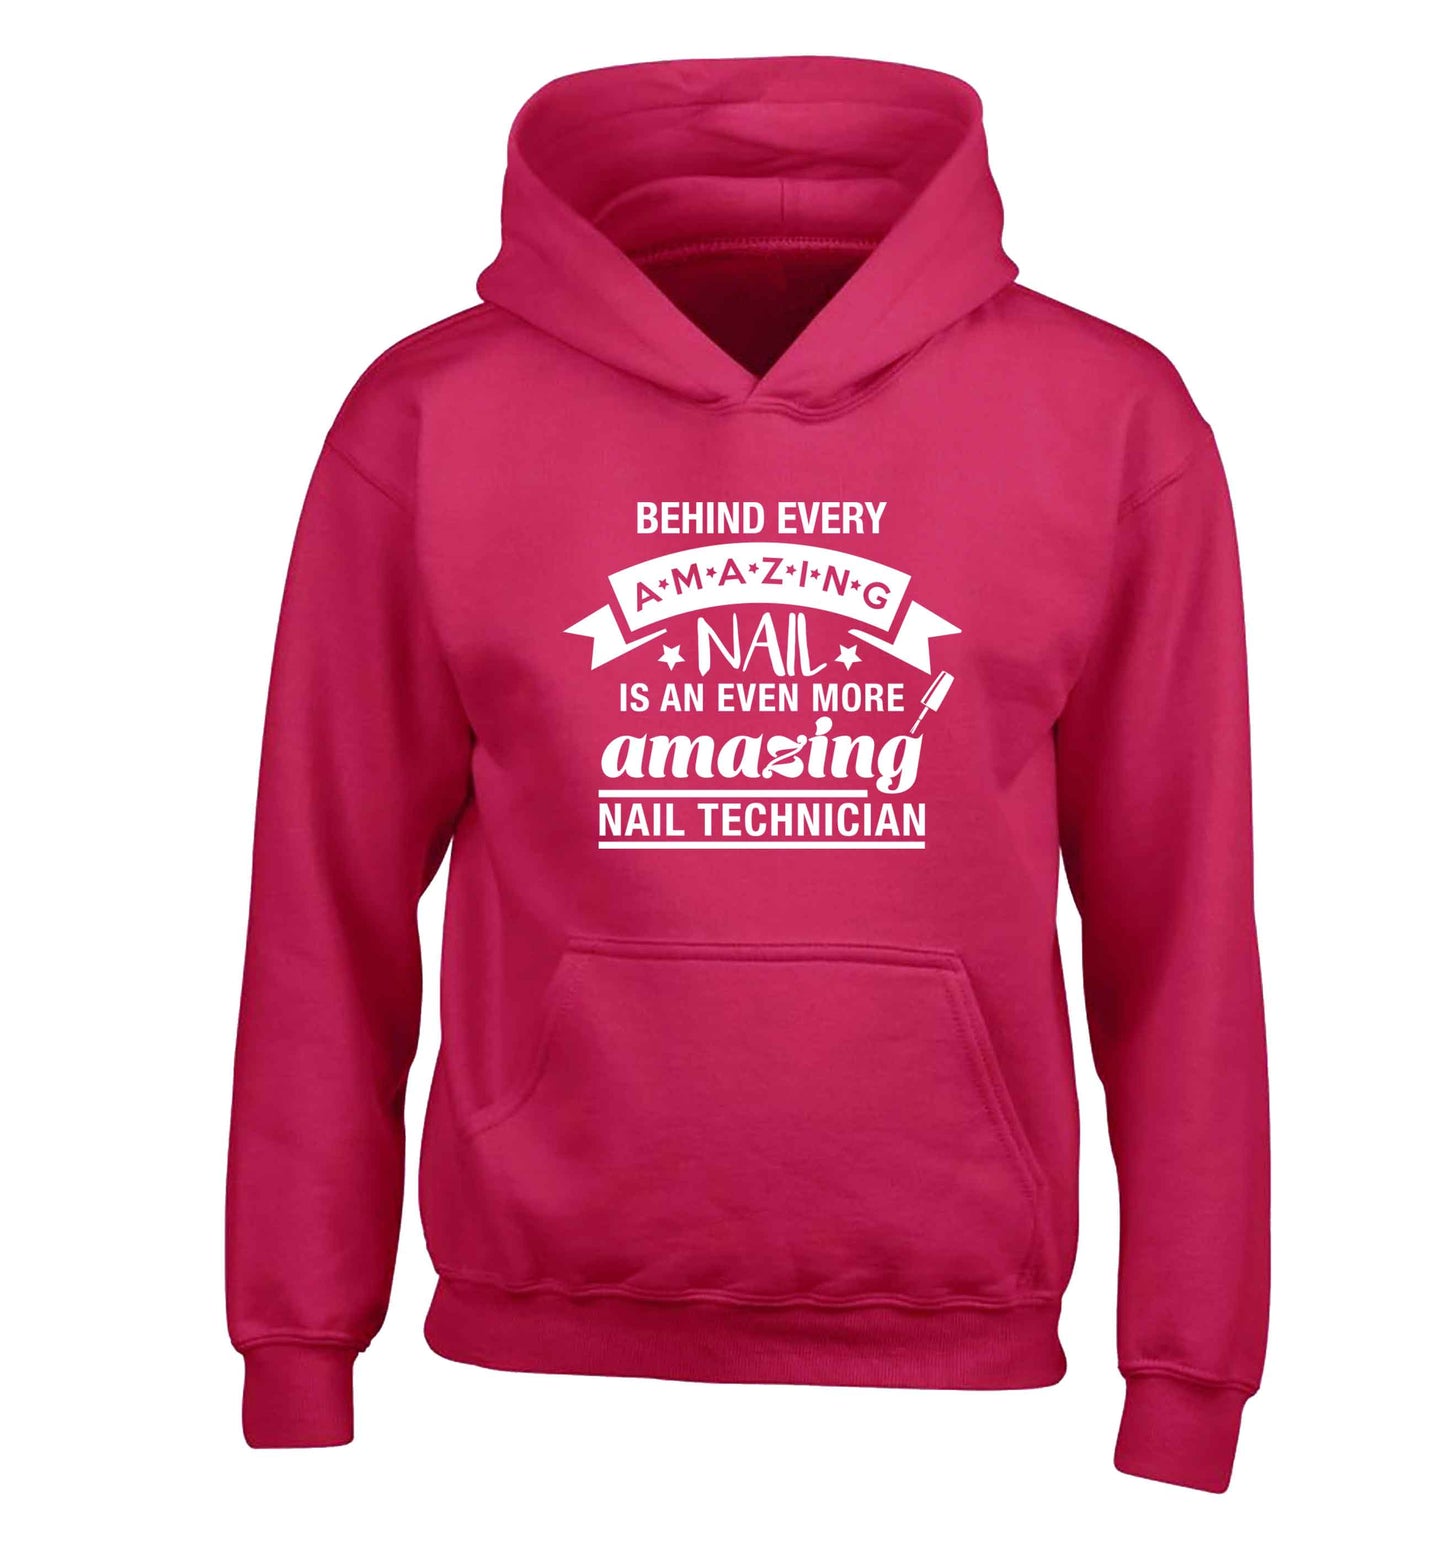 Behind every amazing nail is an even more amazing nail technician children's pink hoodie 12-13 Years